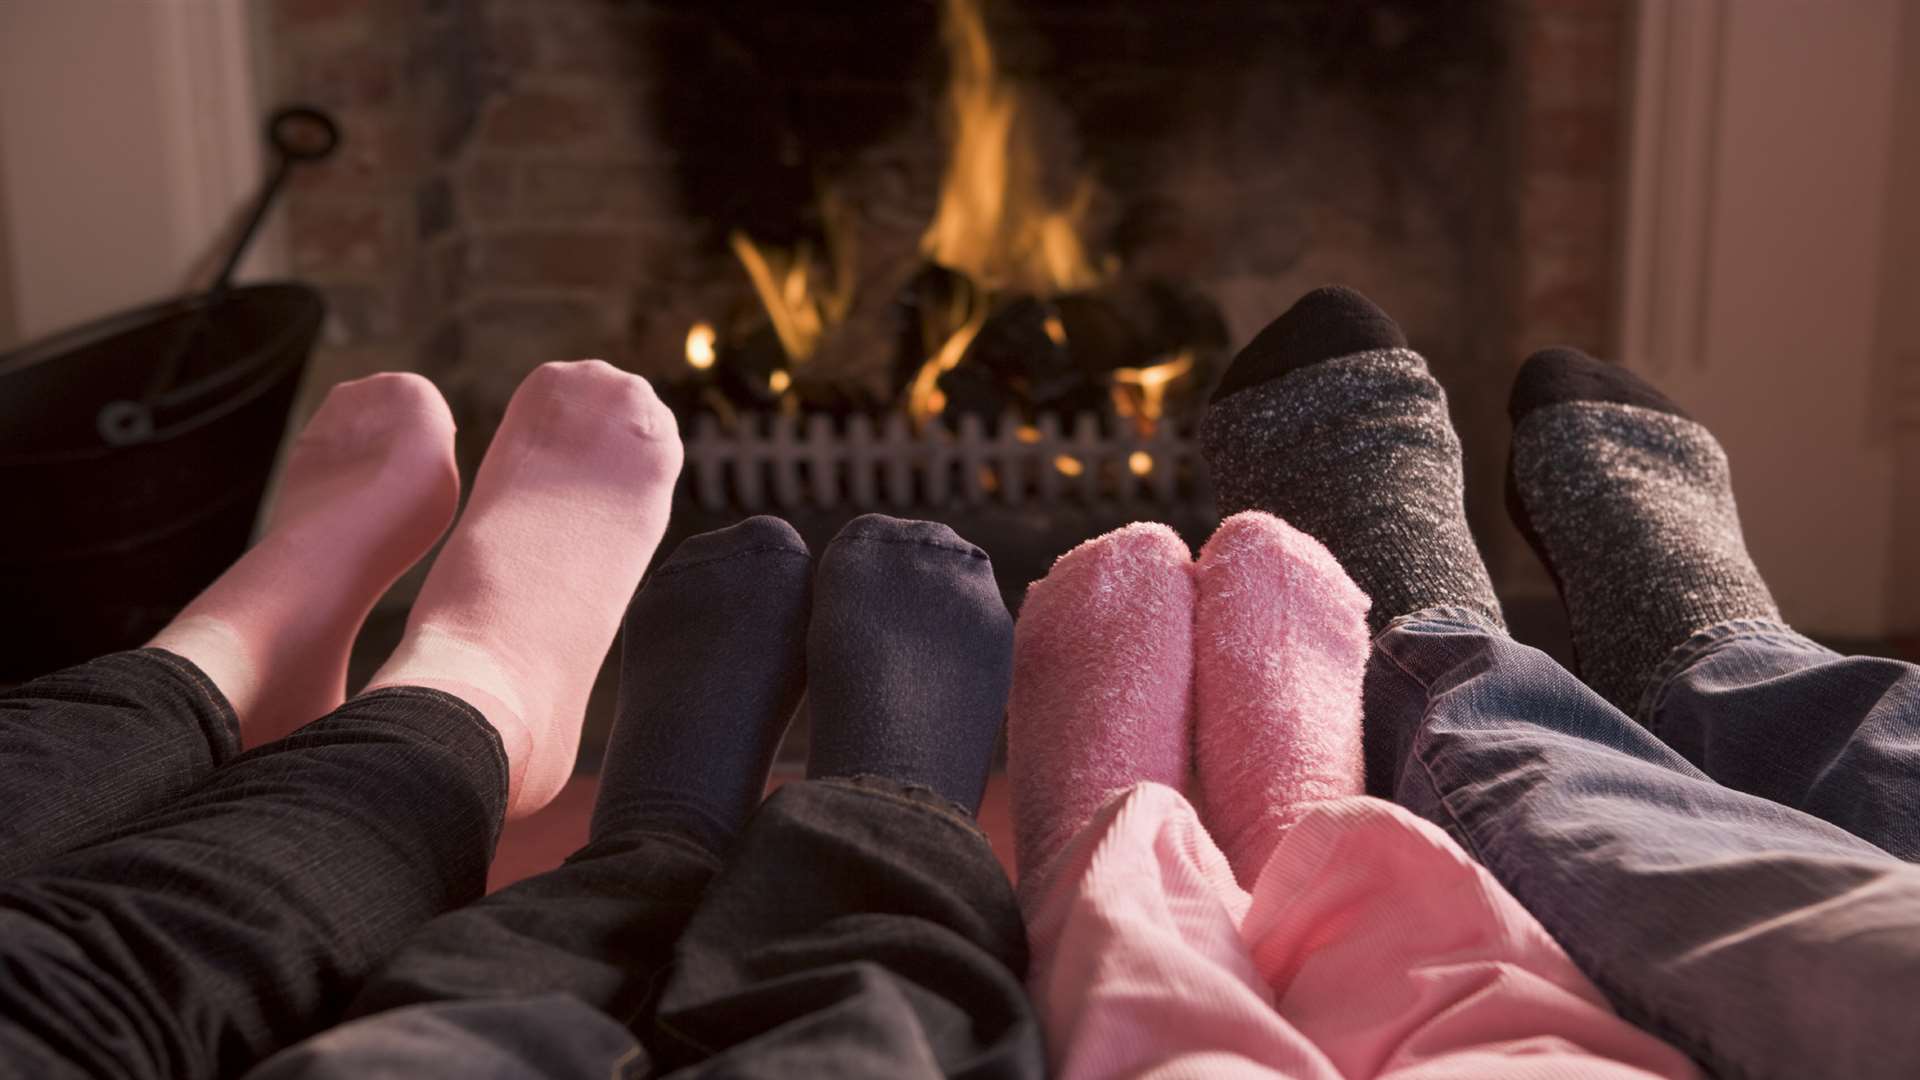 The council is hoping to help households keep warm this winter